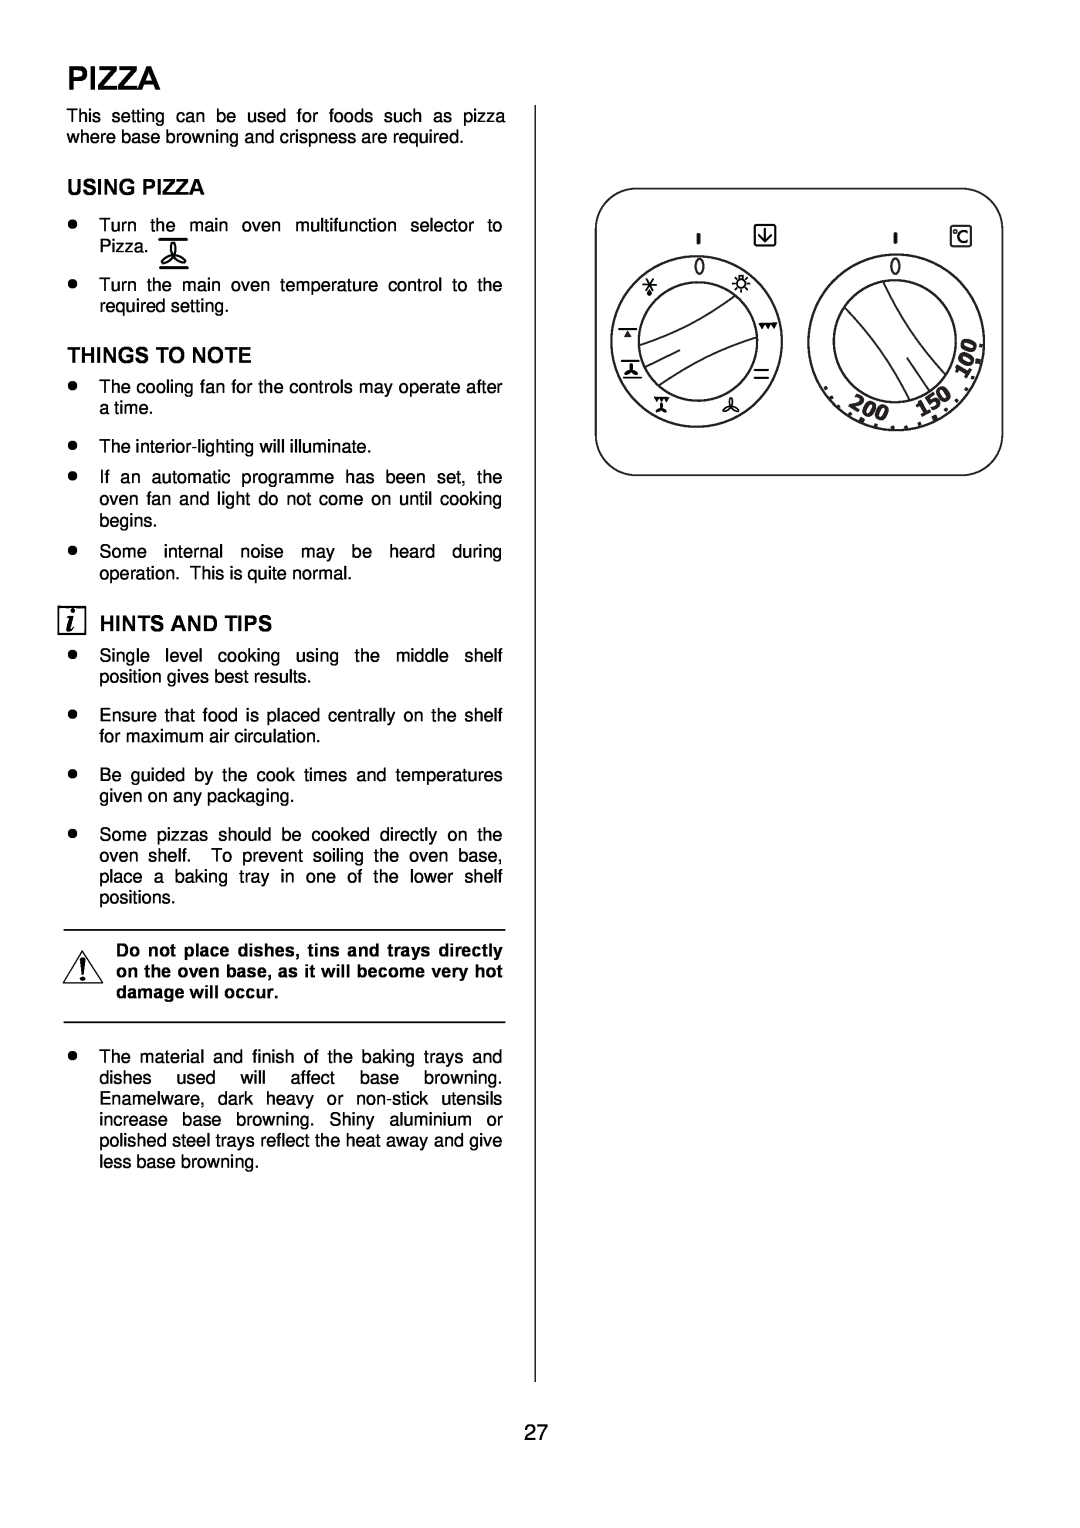 Electrolux D77000GF operating instructions Using Pizza, Things To Note, Hints And Tips 